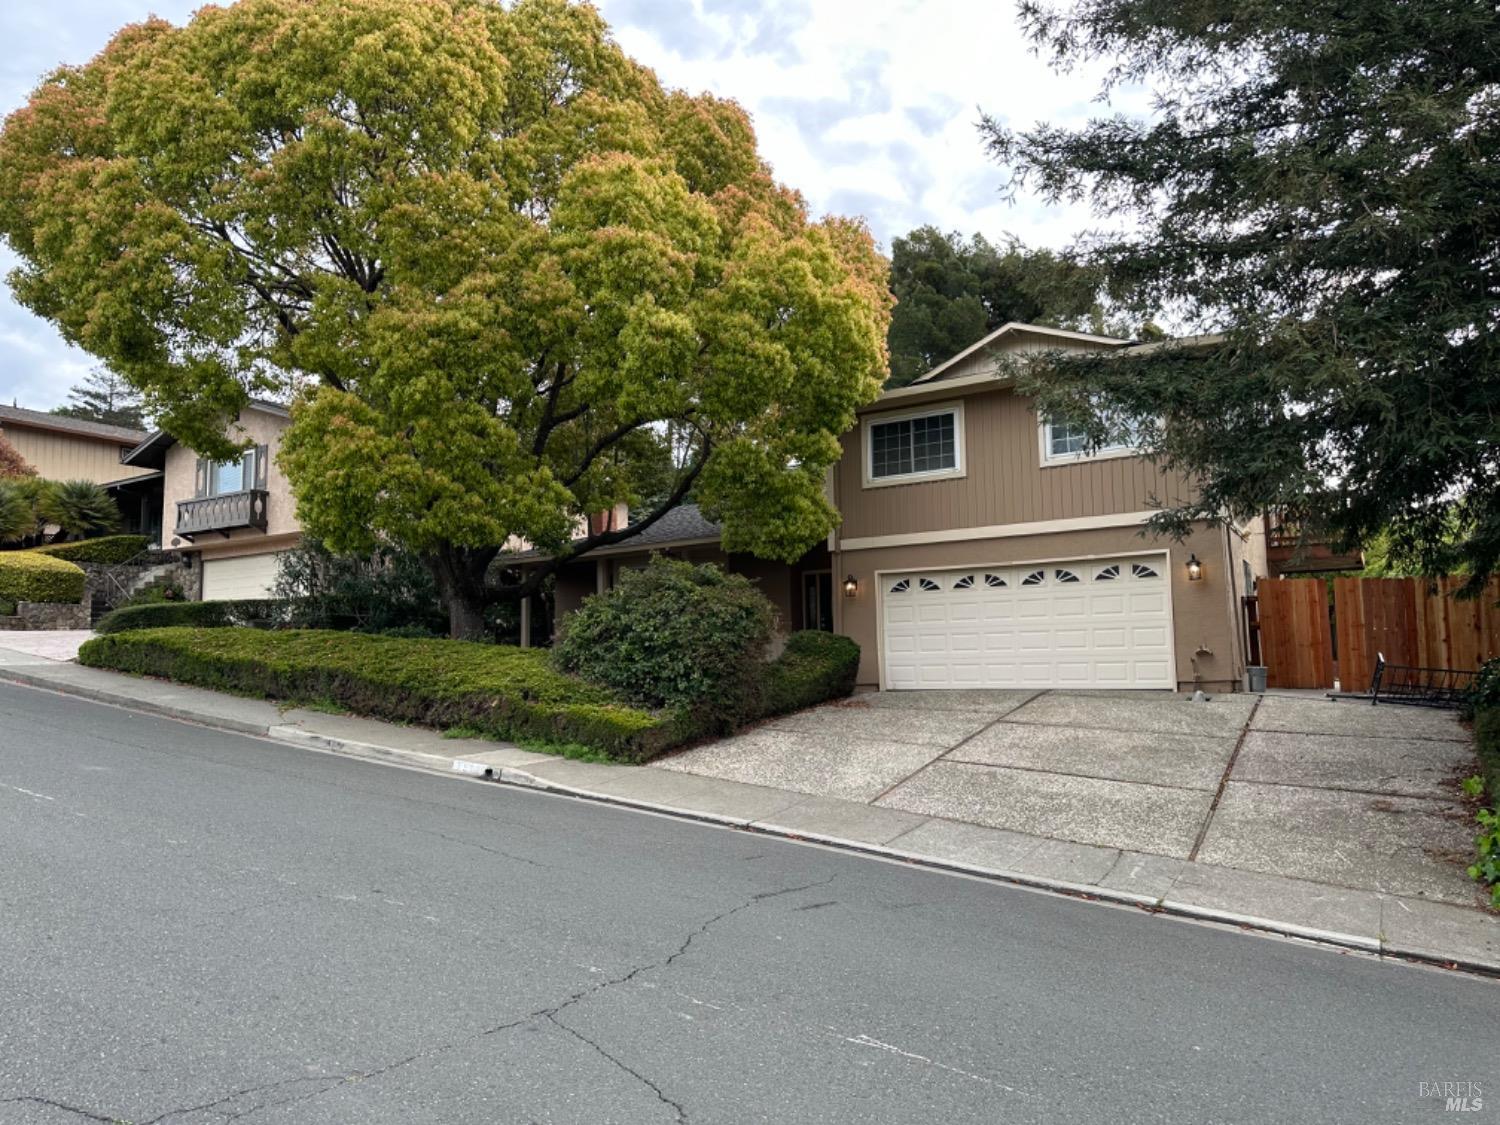 Photo of 1568 Vervais Ave in Vallejo, CA